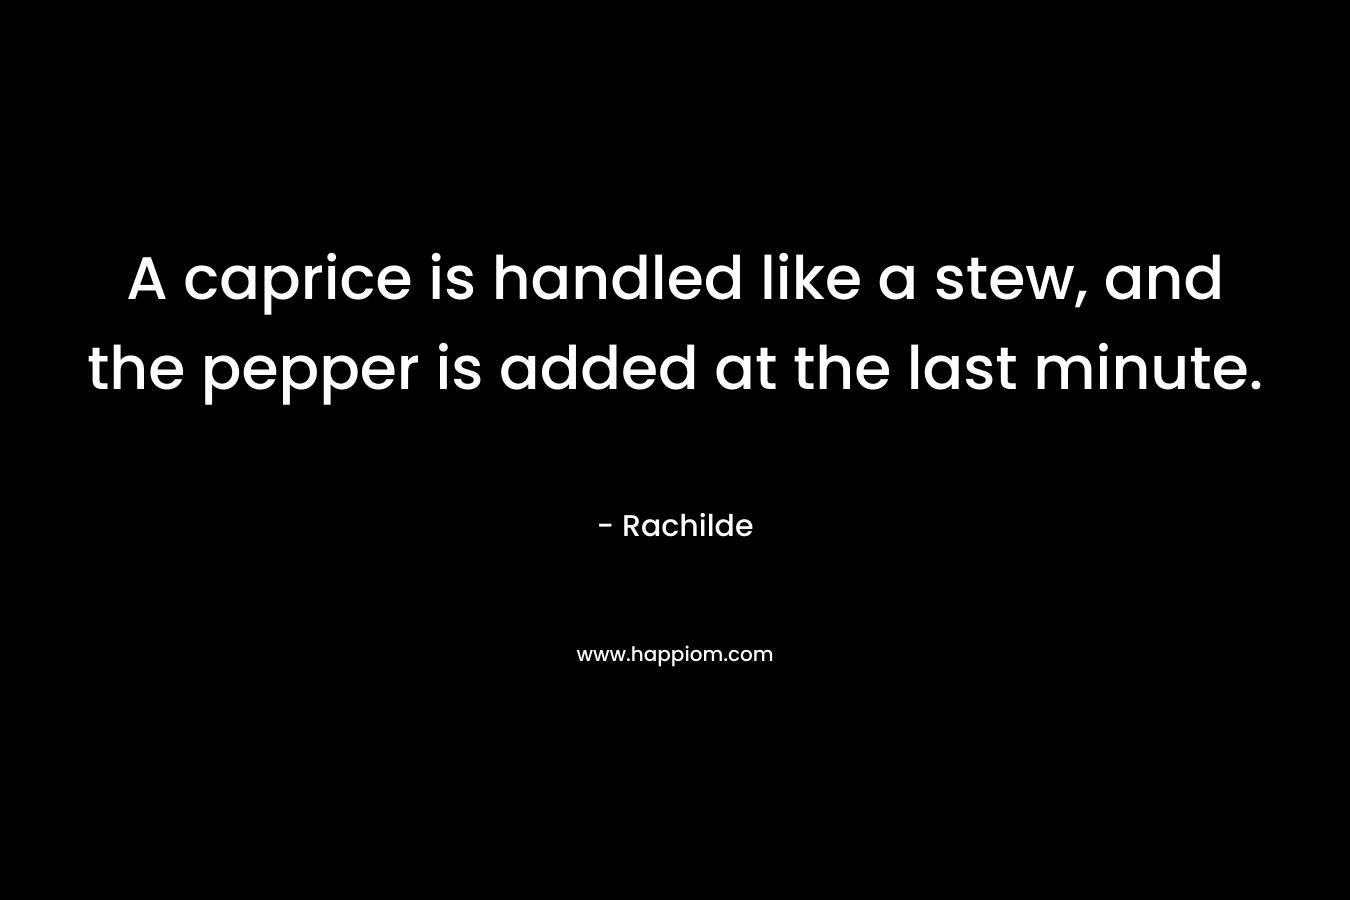 A caprice is handled like a stew, and the pepper is added at the last minute. – Rachilde